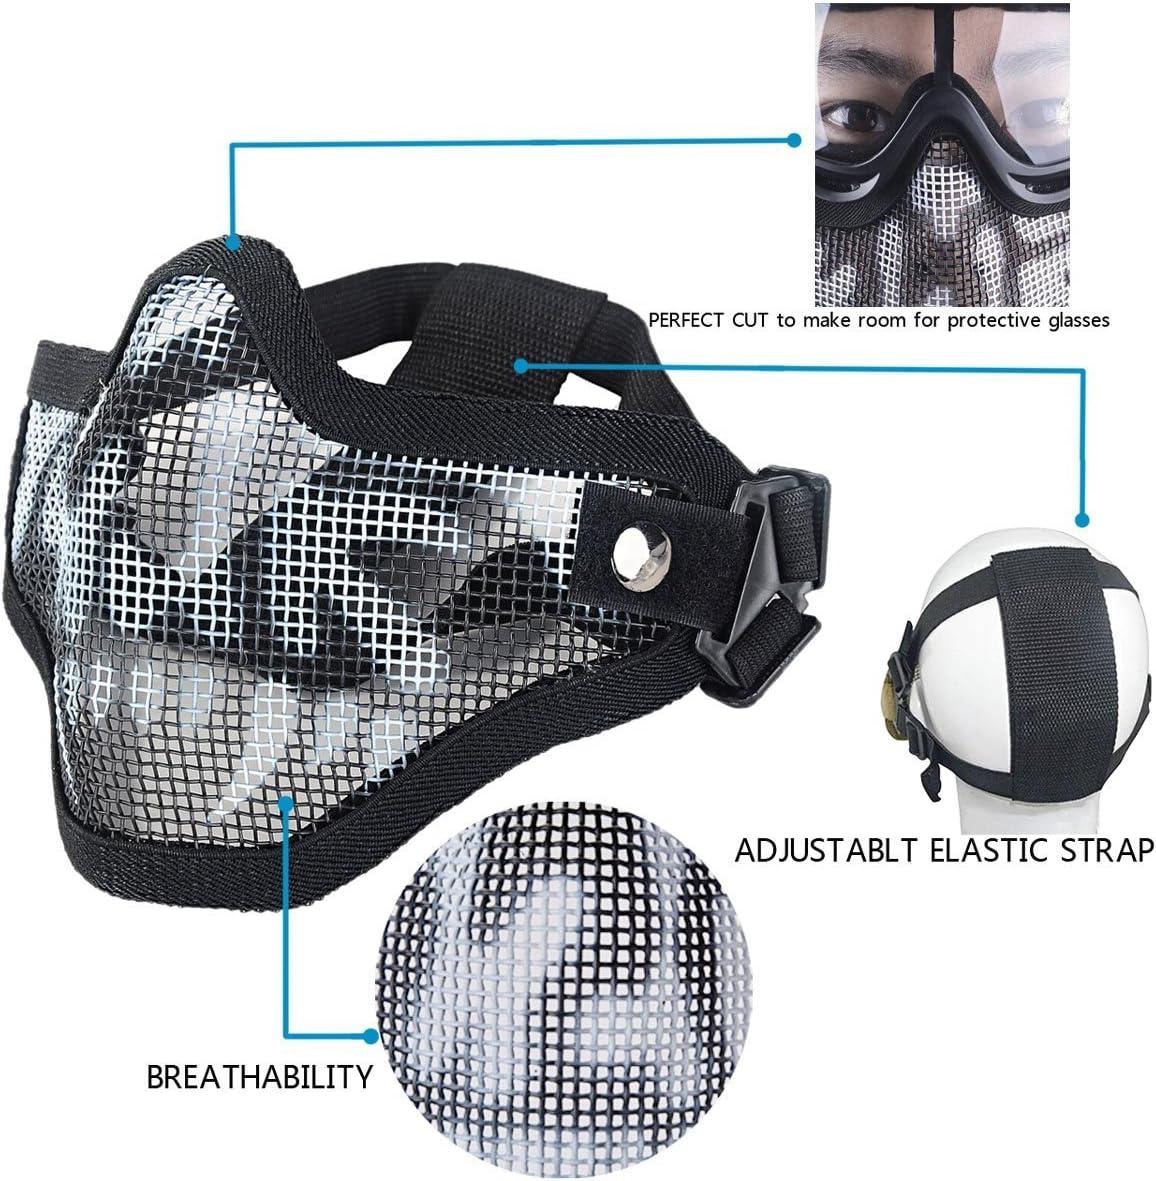 Tactical Paintball Mask Airsoft Masks, For Airsoft BB Hunting, CS